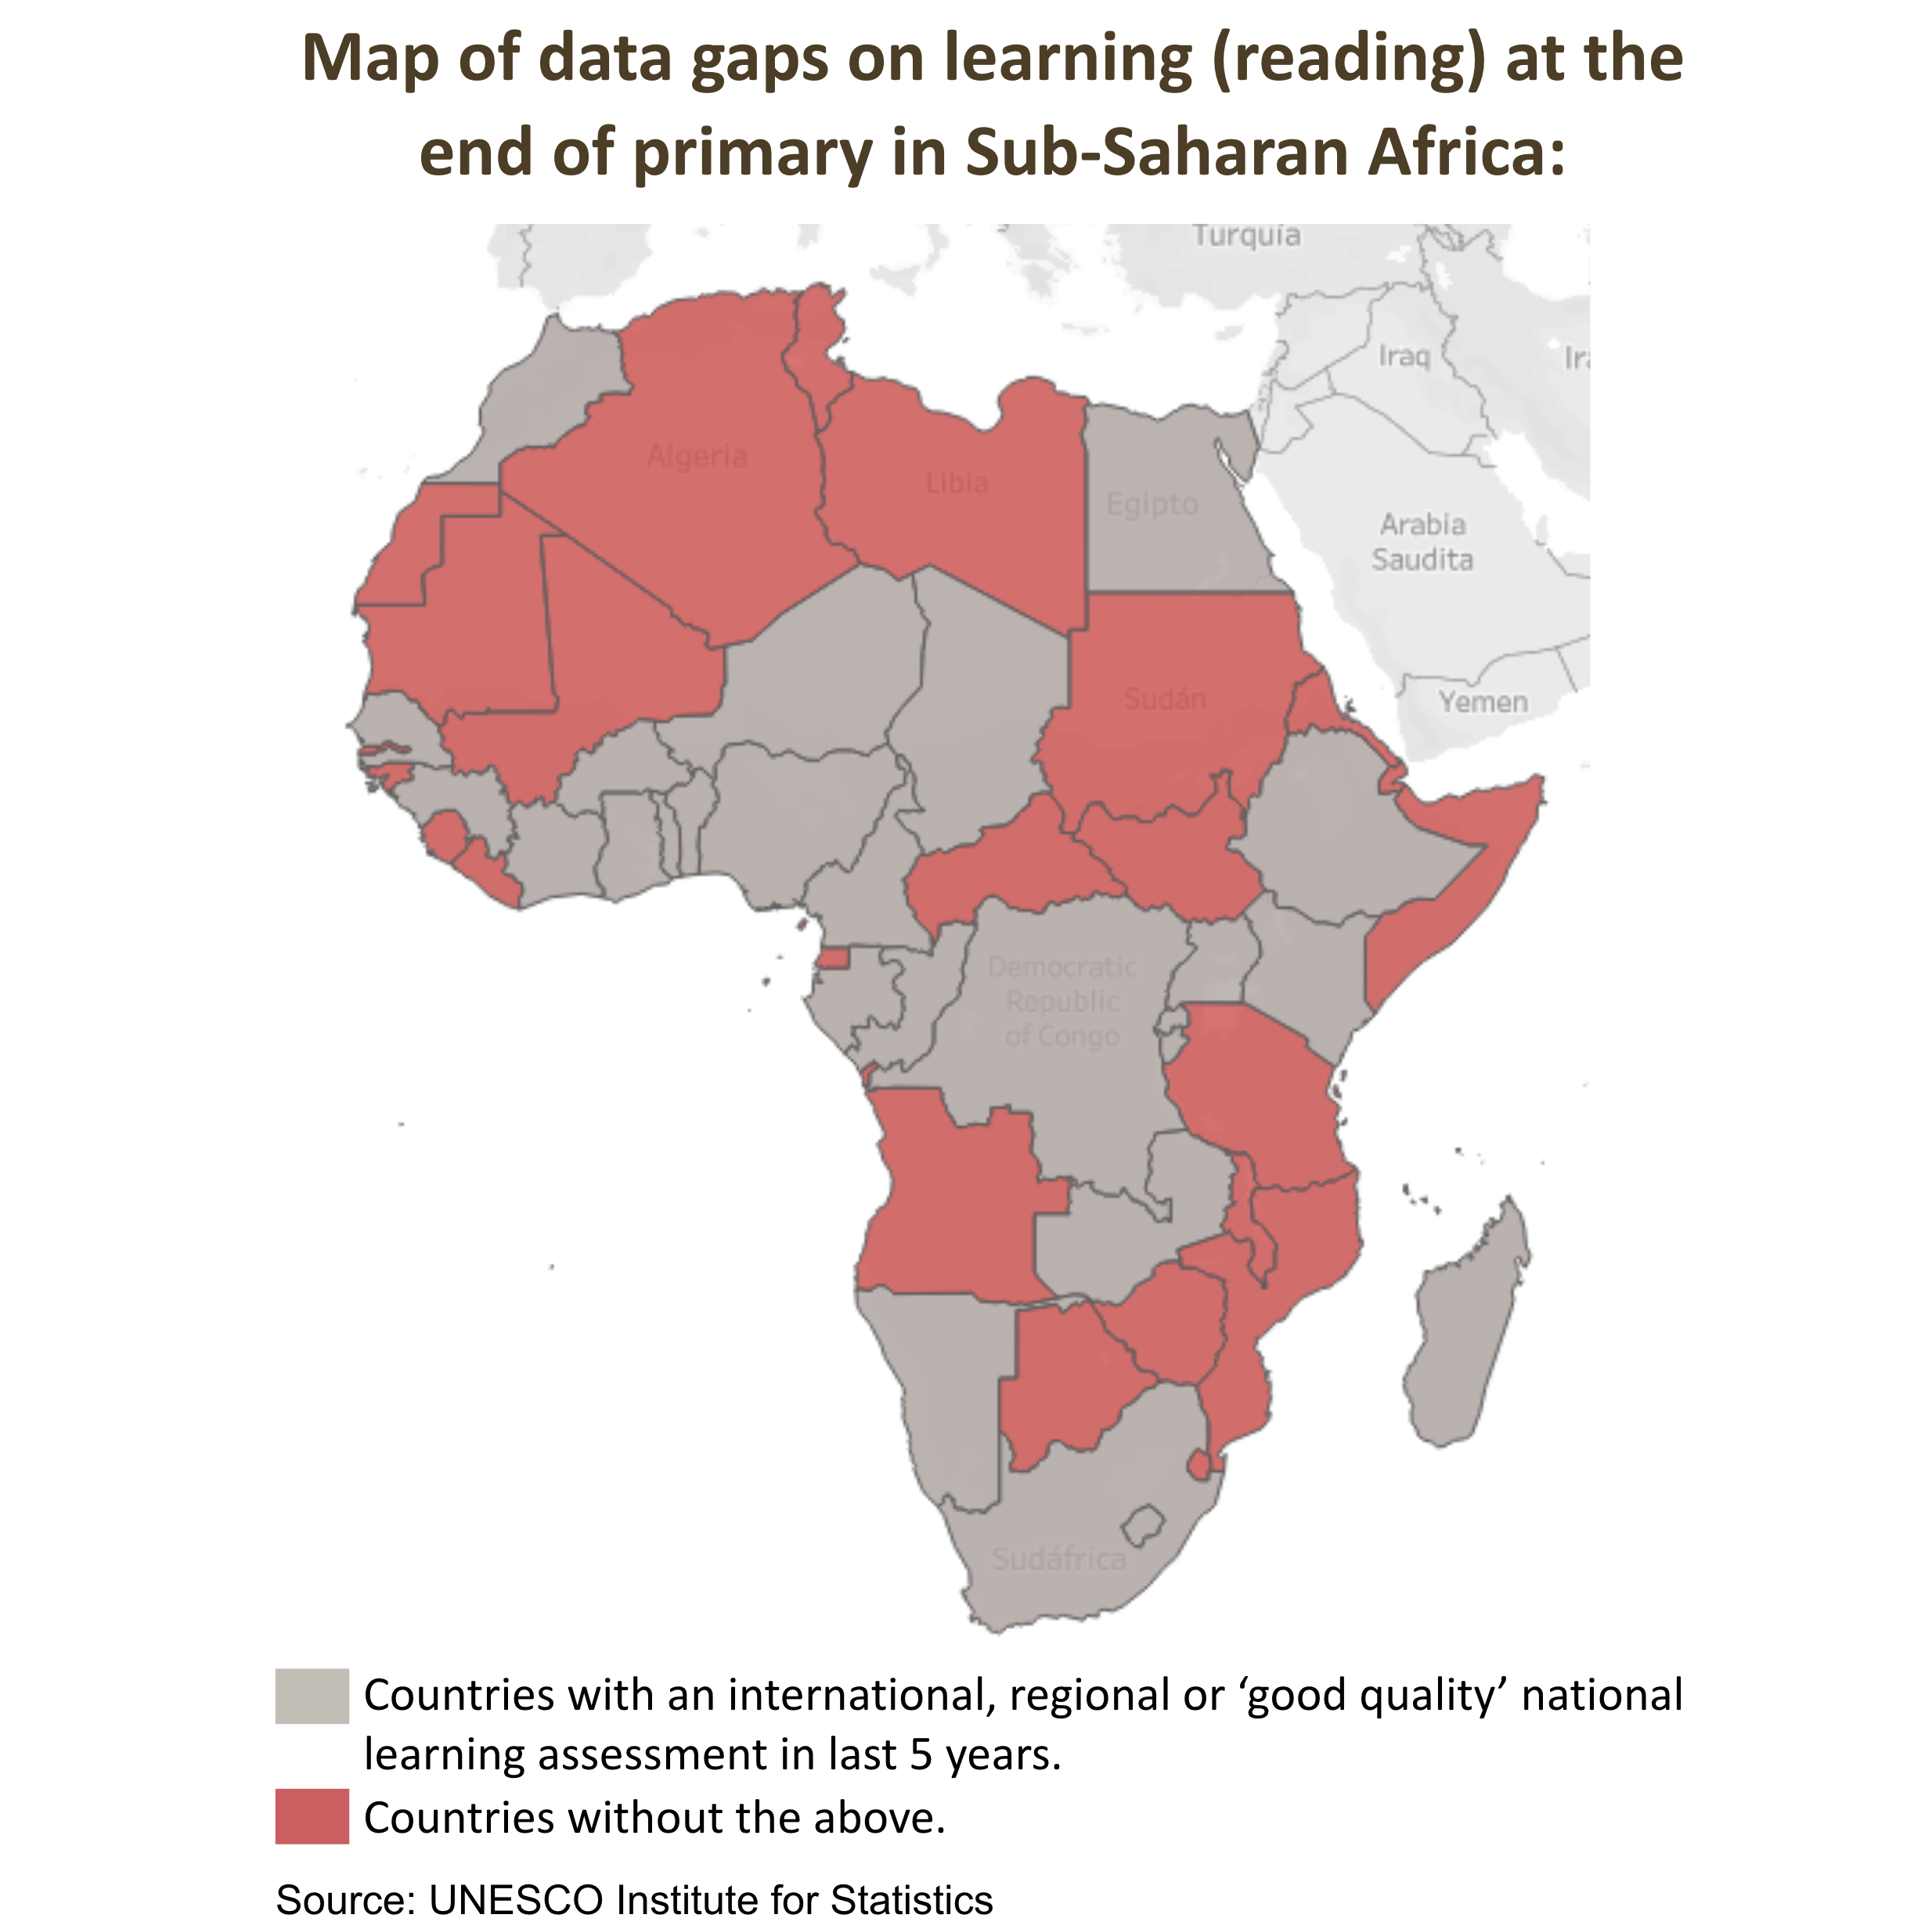 Map of data gaps on learning (reading) at the end of primary in Sub-Saharan Africa